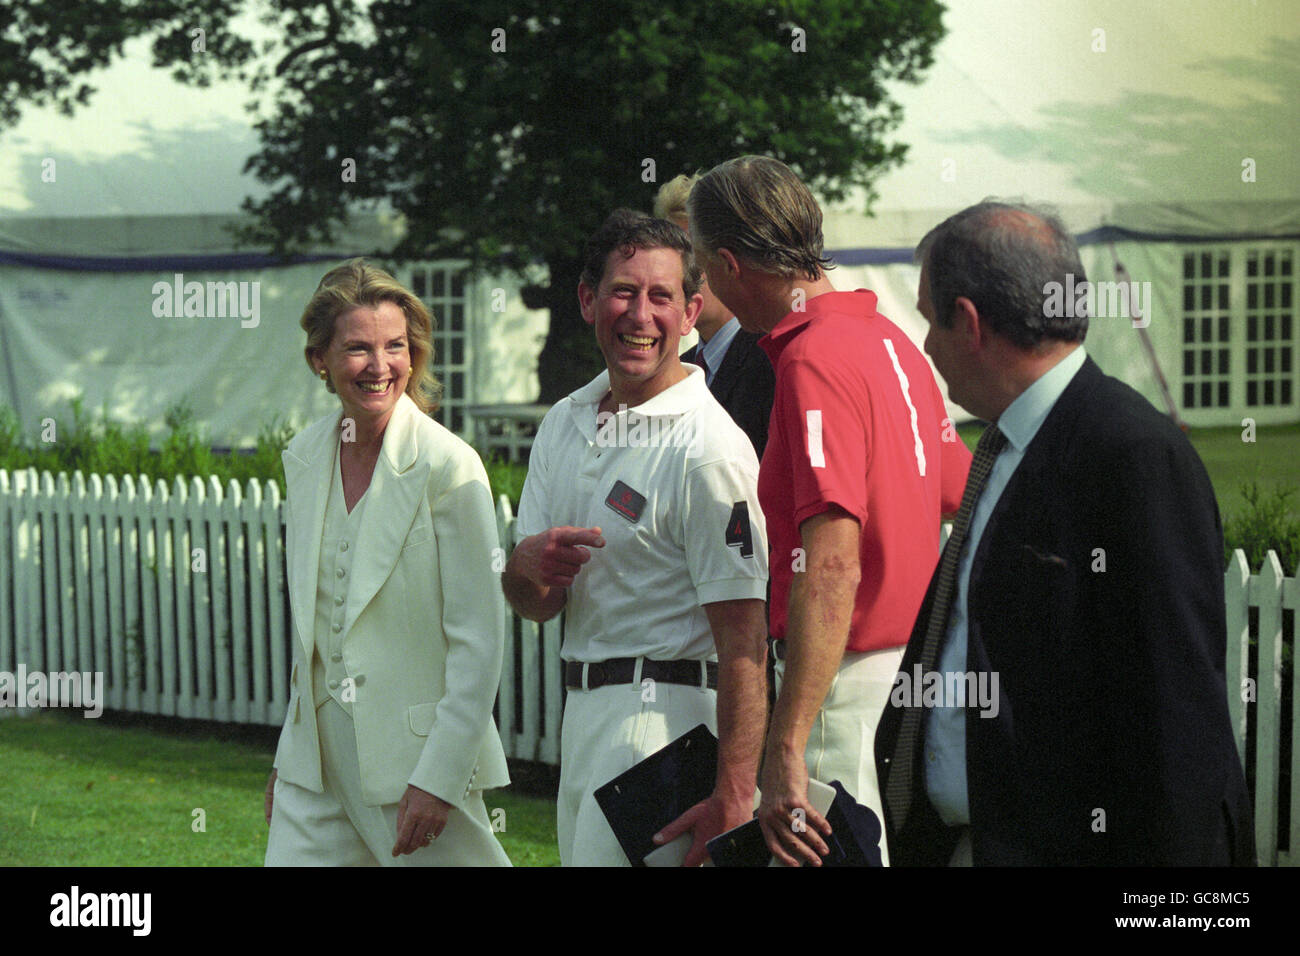 PRINCE OF WALES WITH FRIENDS AT THE HIGH GOAL CHALLENGE CUP AT ROYAL BERKSHIRE POLO CLUB. Stock Photo